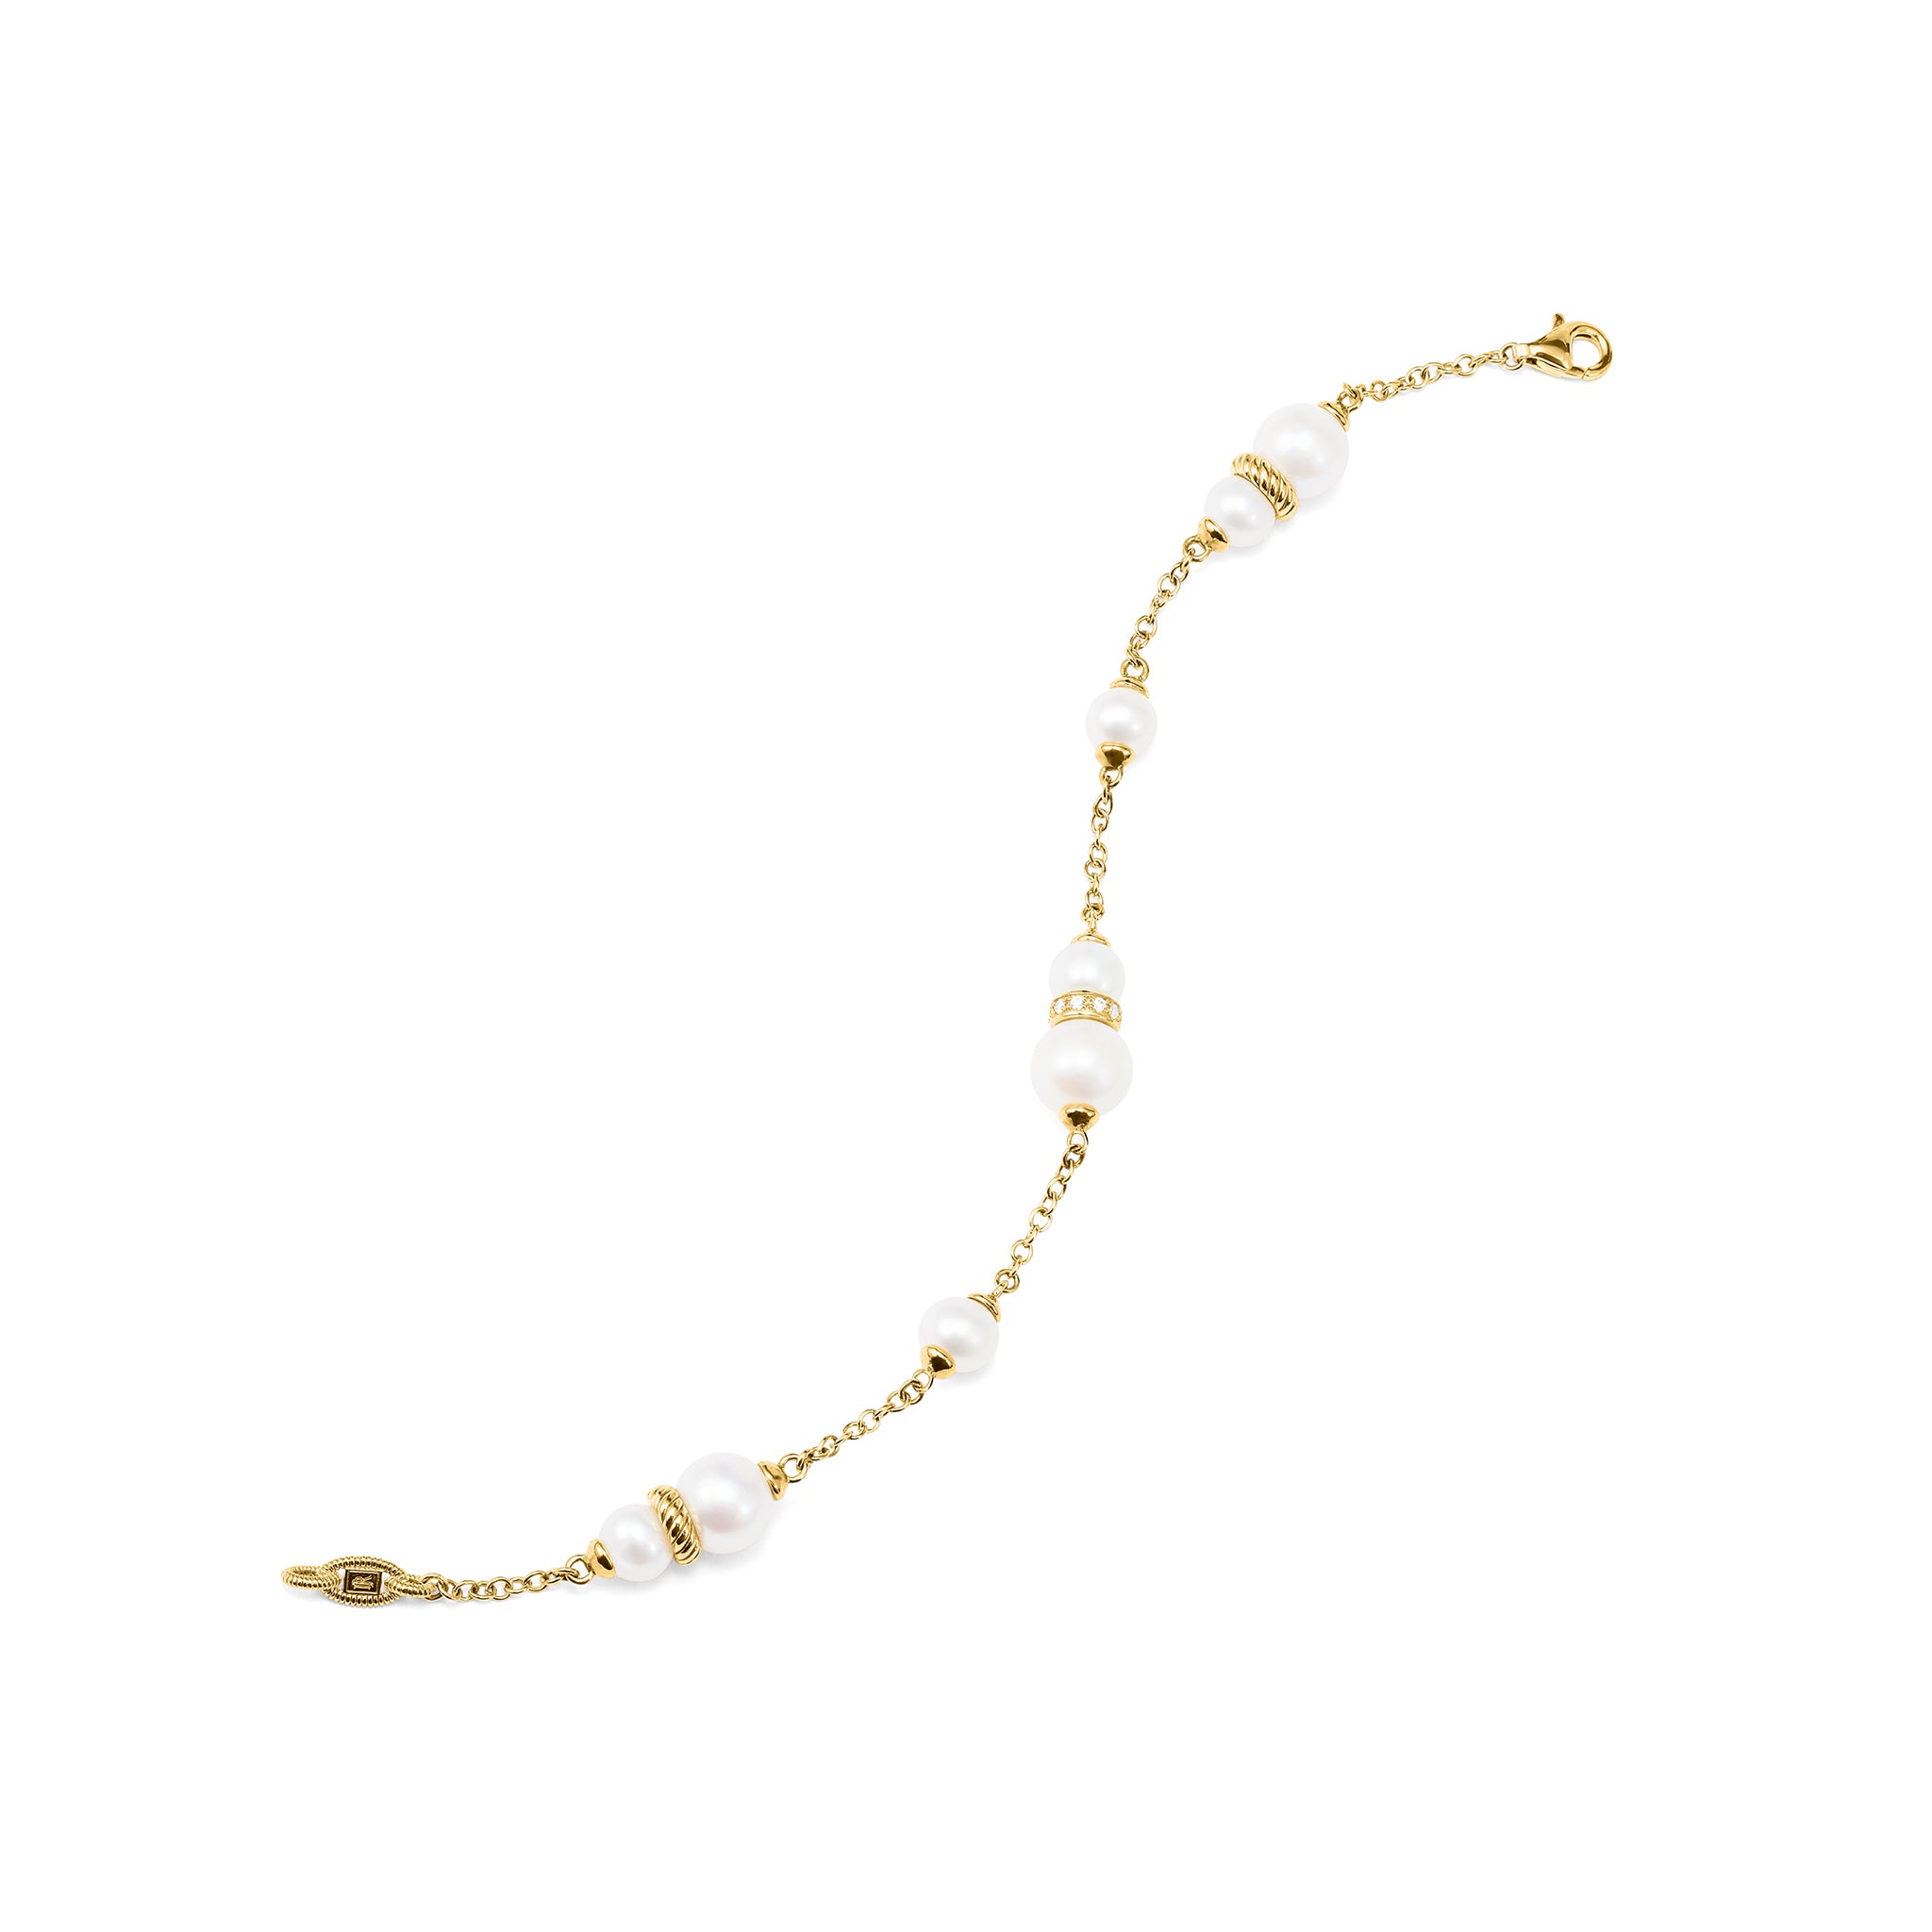 Shima Bracelet with Freshwater Pearls and Diamonds in 18K